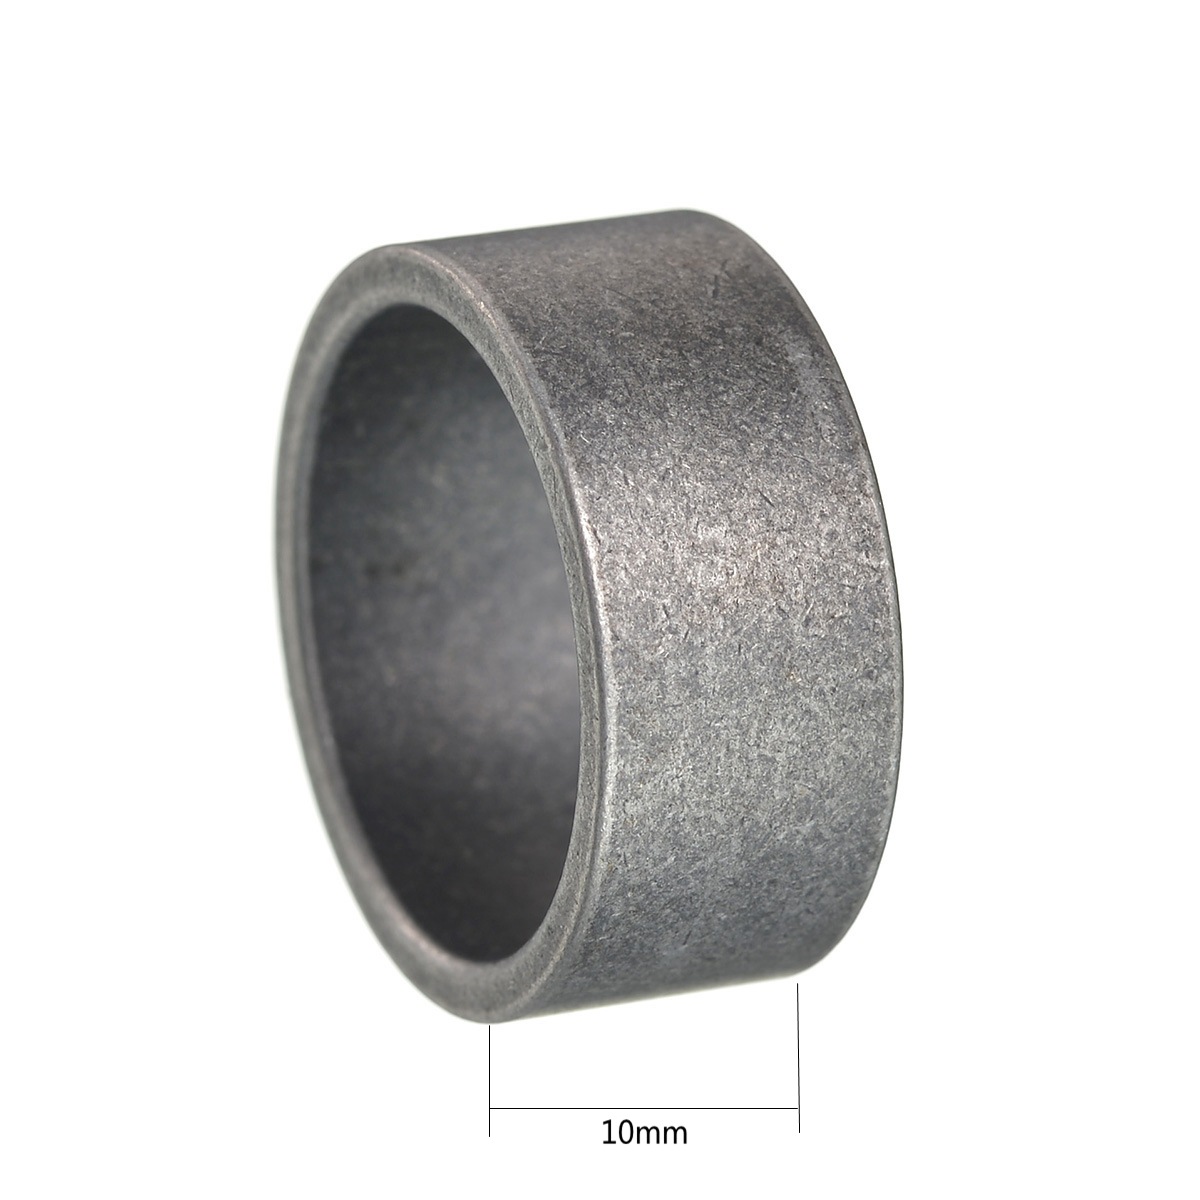 3:10mm antique silver finish